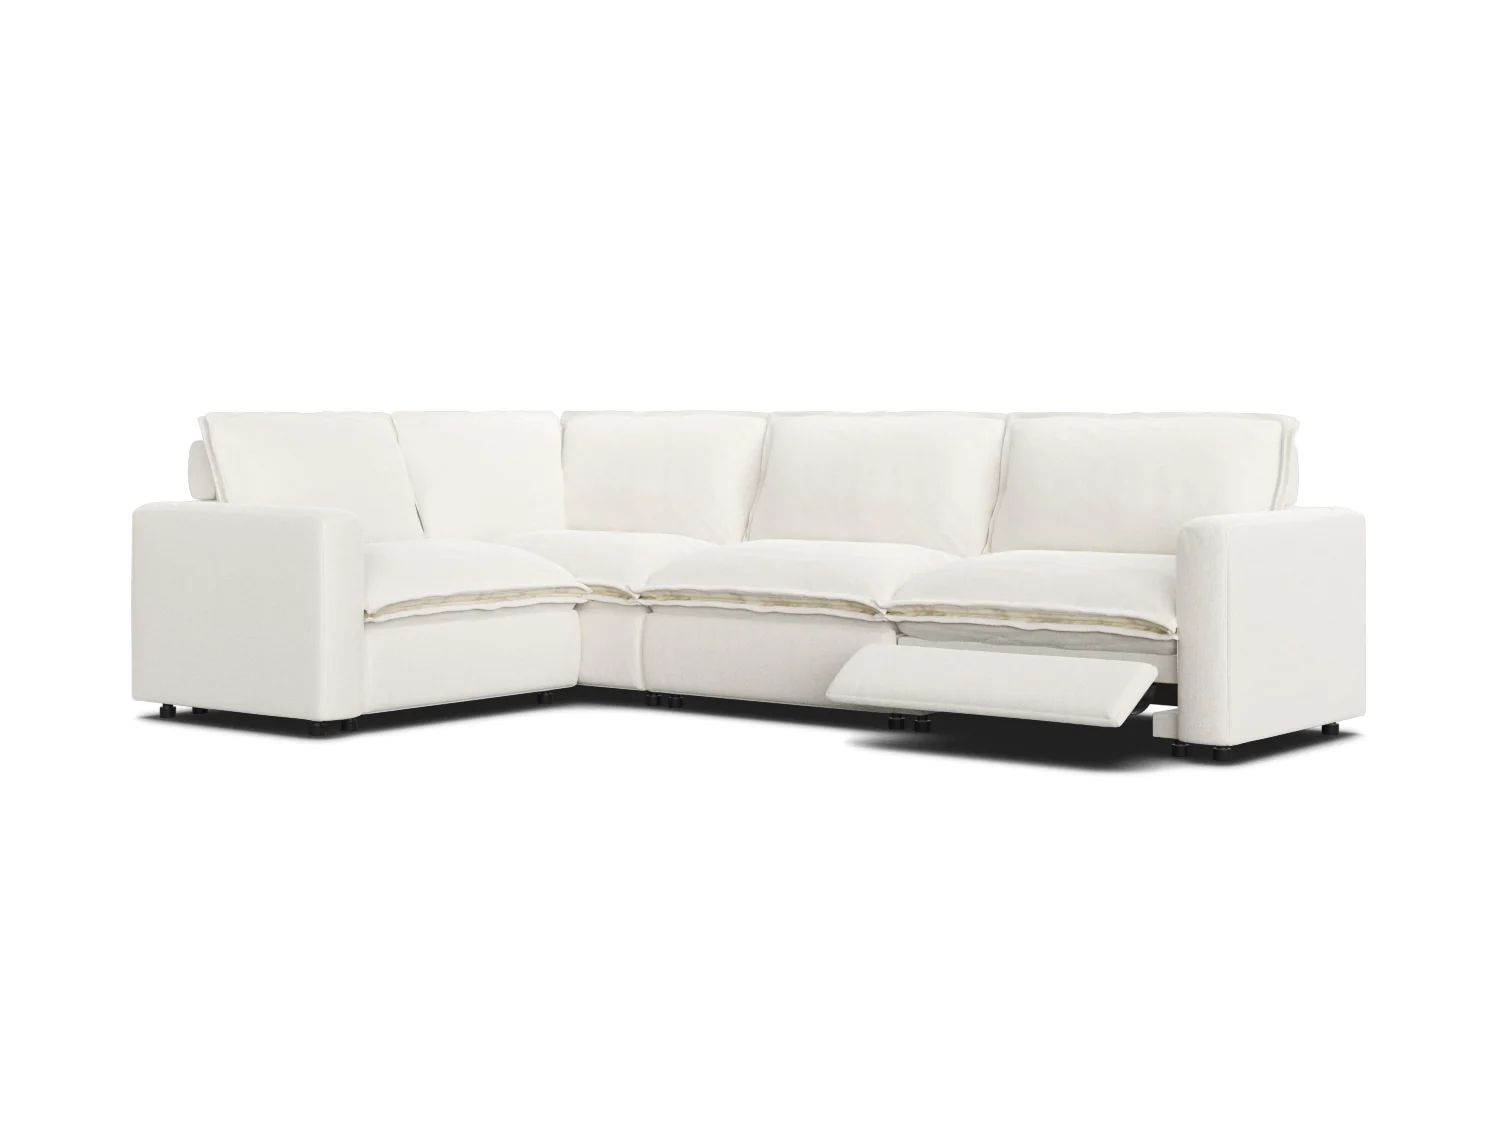 White linen 4 seat modular sectional couch with a recliner | Homebody | Homebody